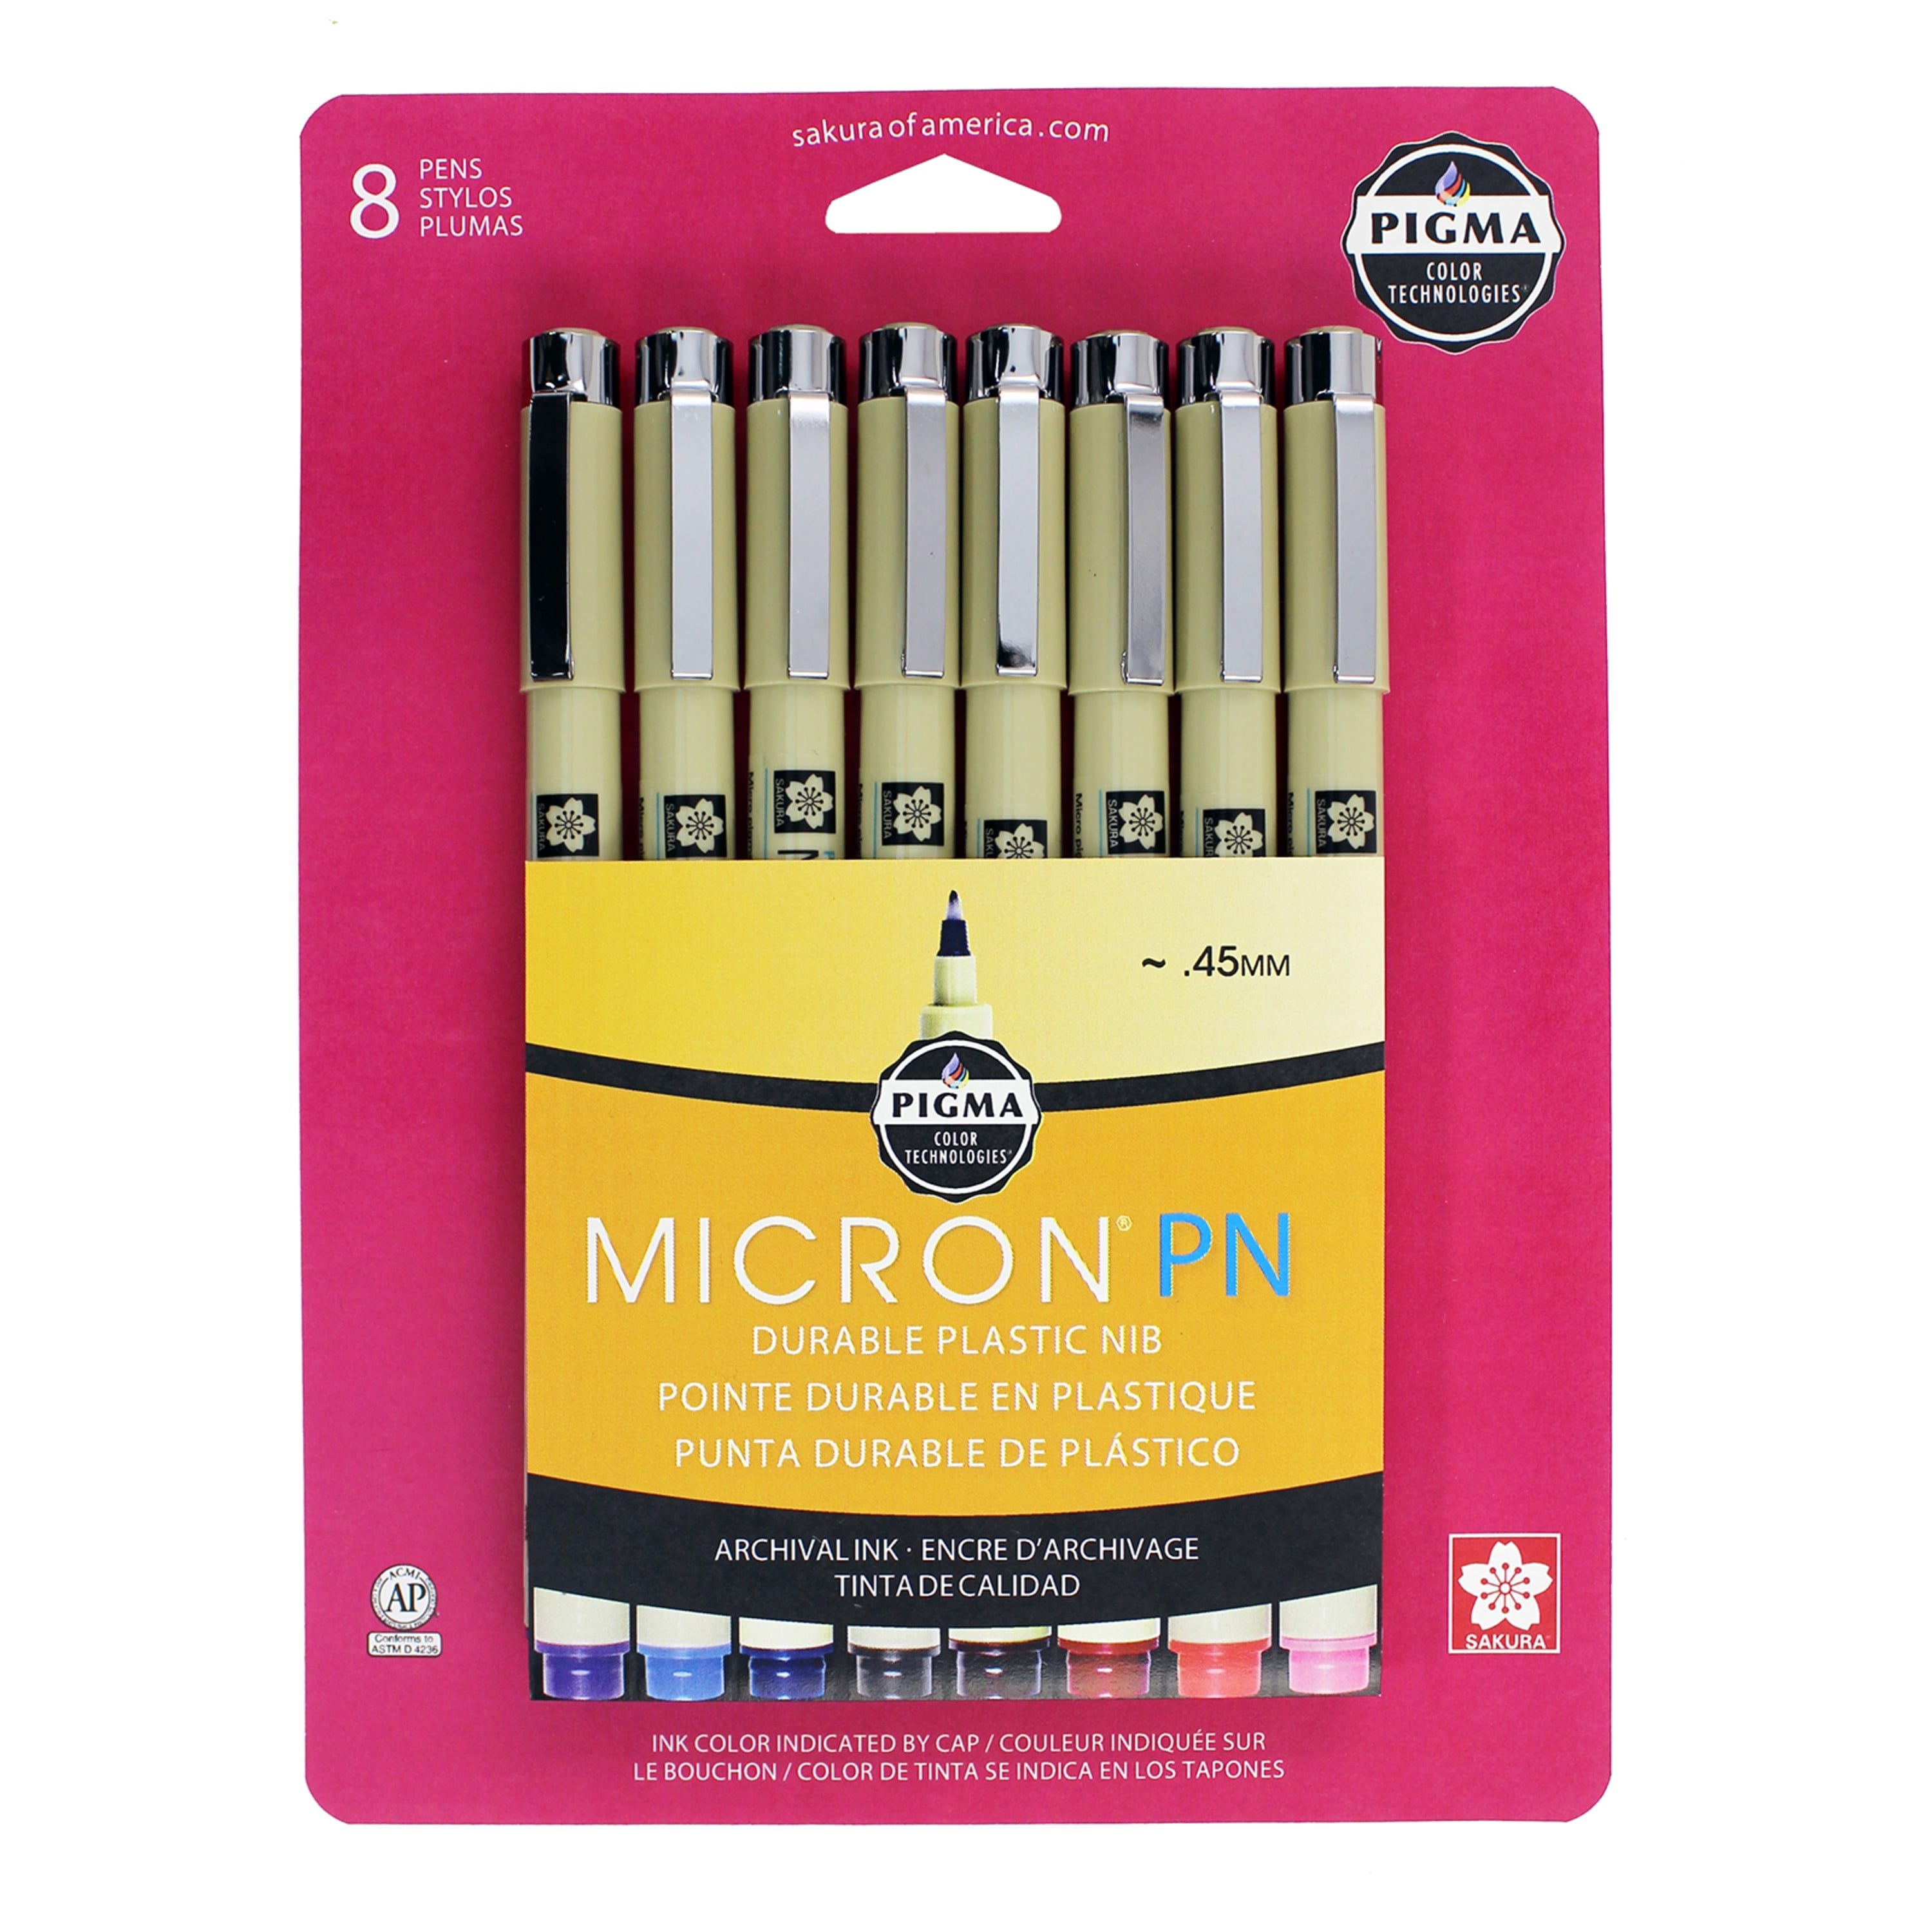 Sepia Fineliner Pens with Archival Ink - Fine Tip Inking Pens Pack of 6